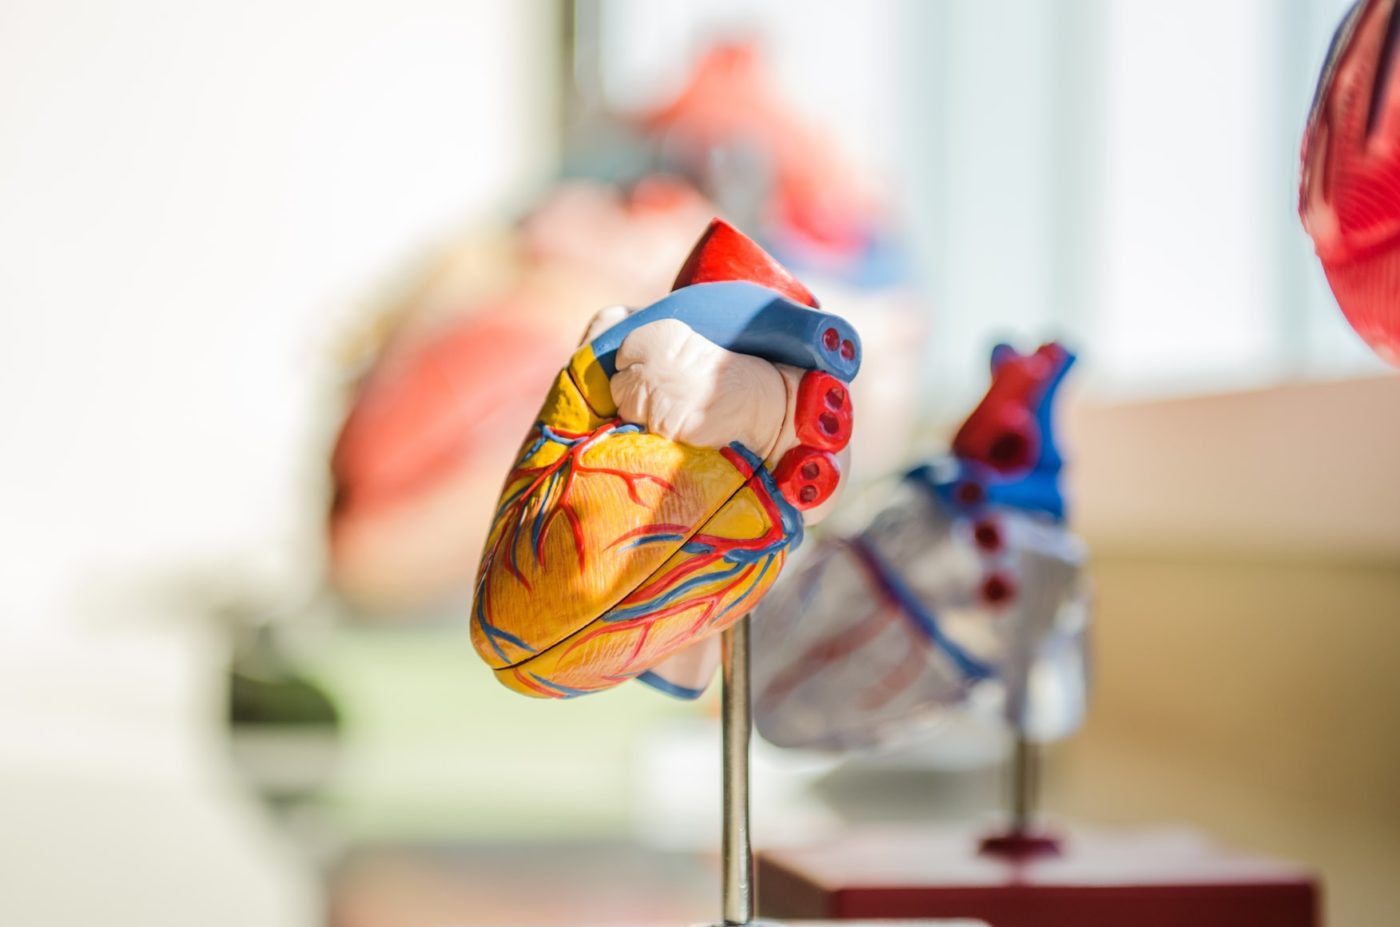 Bionest experts discuss the growing adoption of artificial intelligence (AI) / machine learning in the field of cardiology